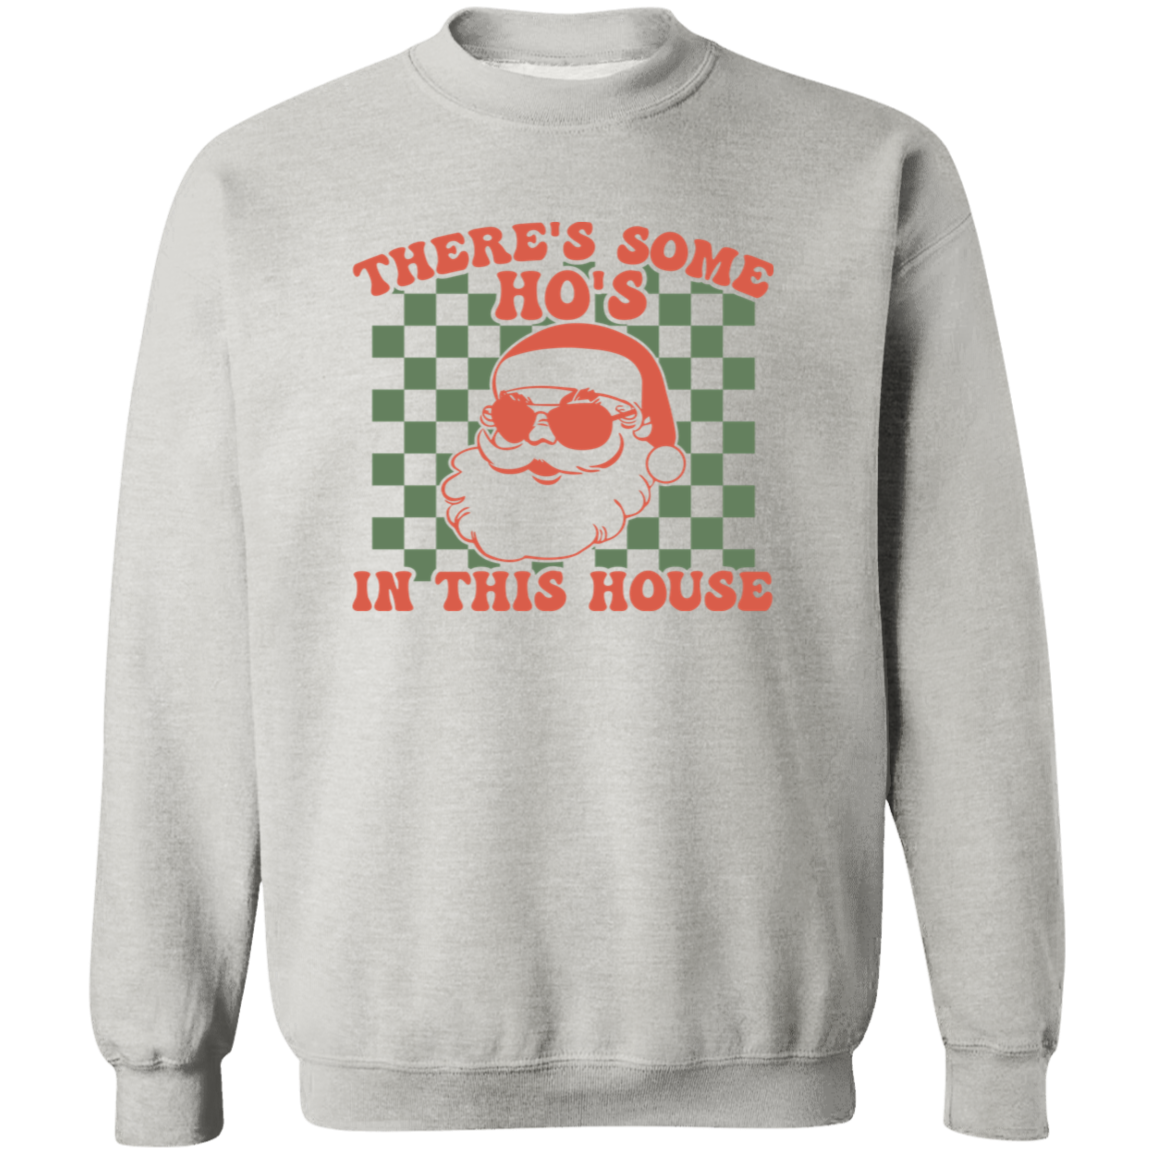 There's Some Ho's In This House Sweatshirt